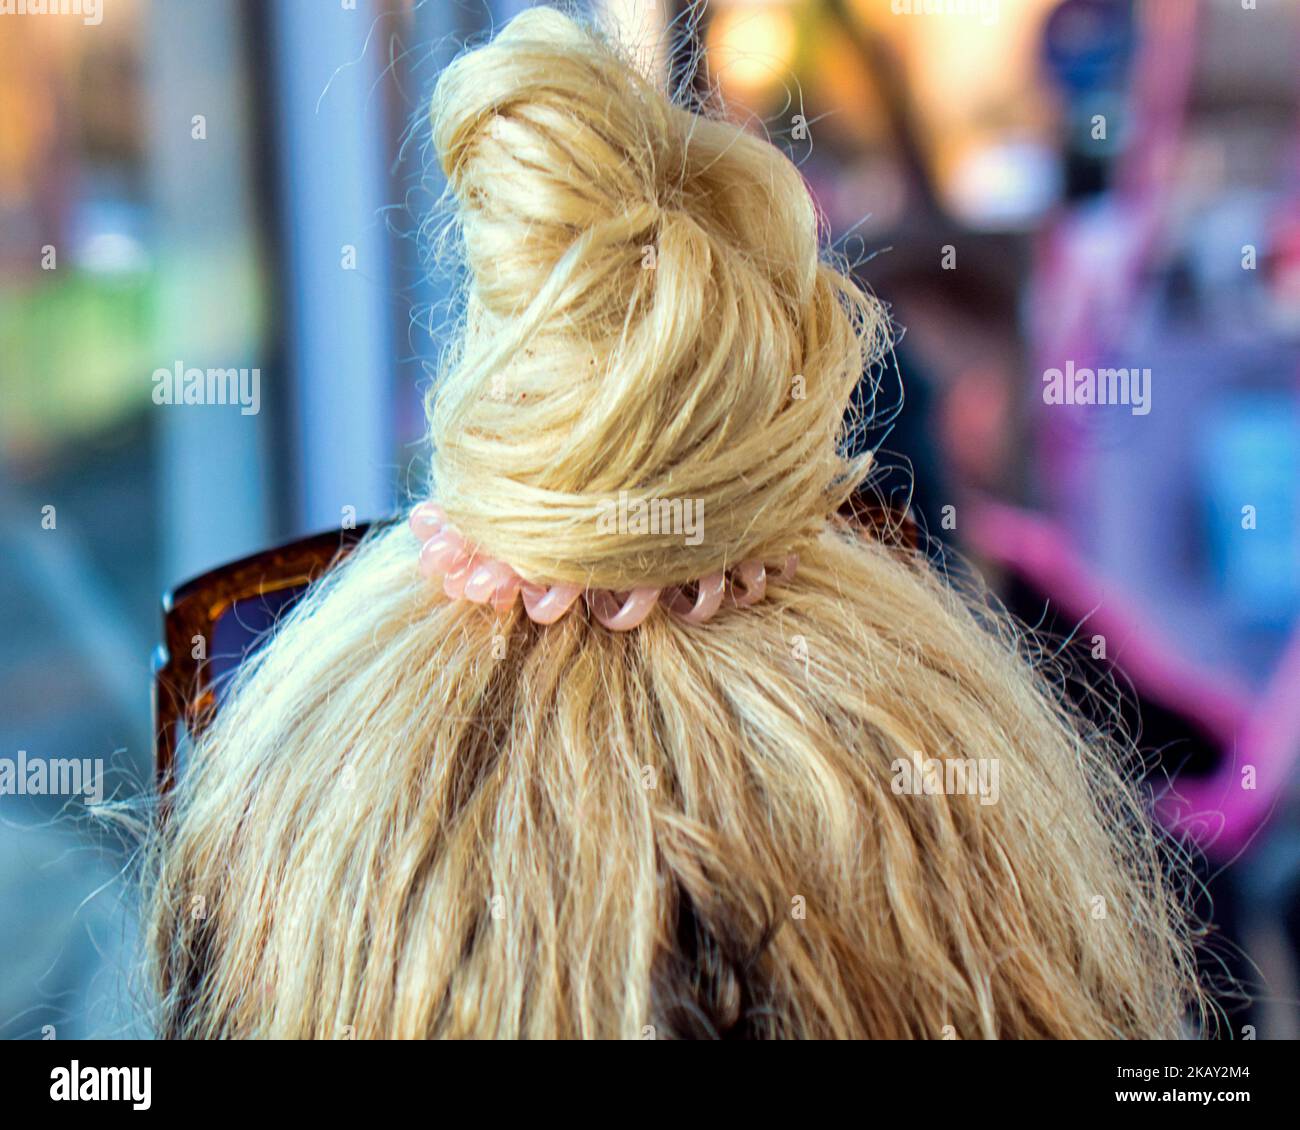 blonde hair tied on a bun on top of the head Stock Photo